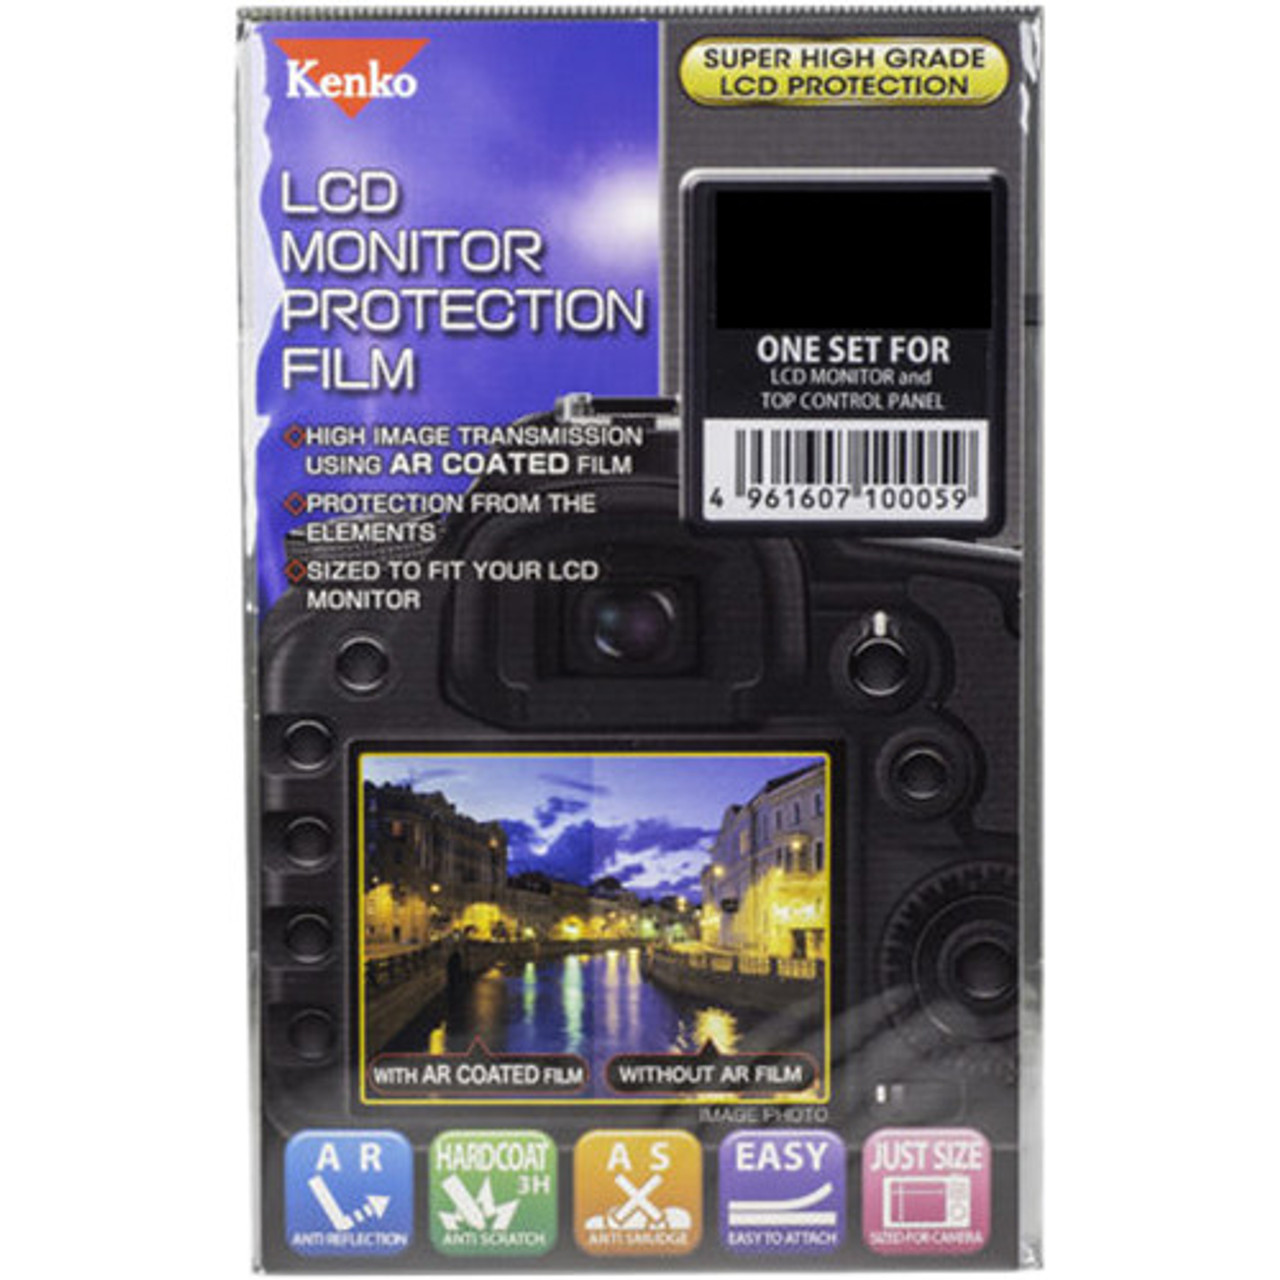 Kenko LCD Monitor Protection Film for the Nikon D750 Camera - Ace Photo